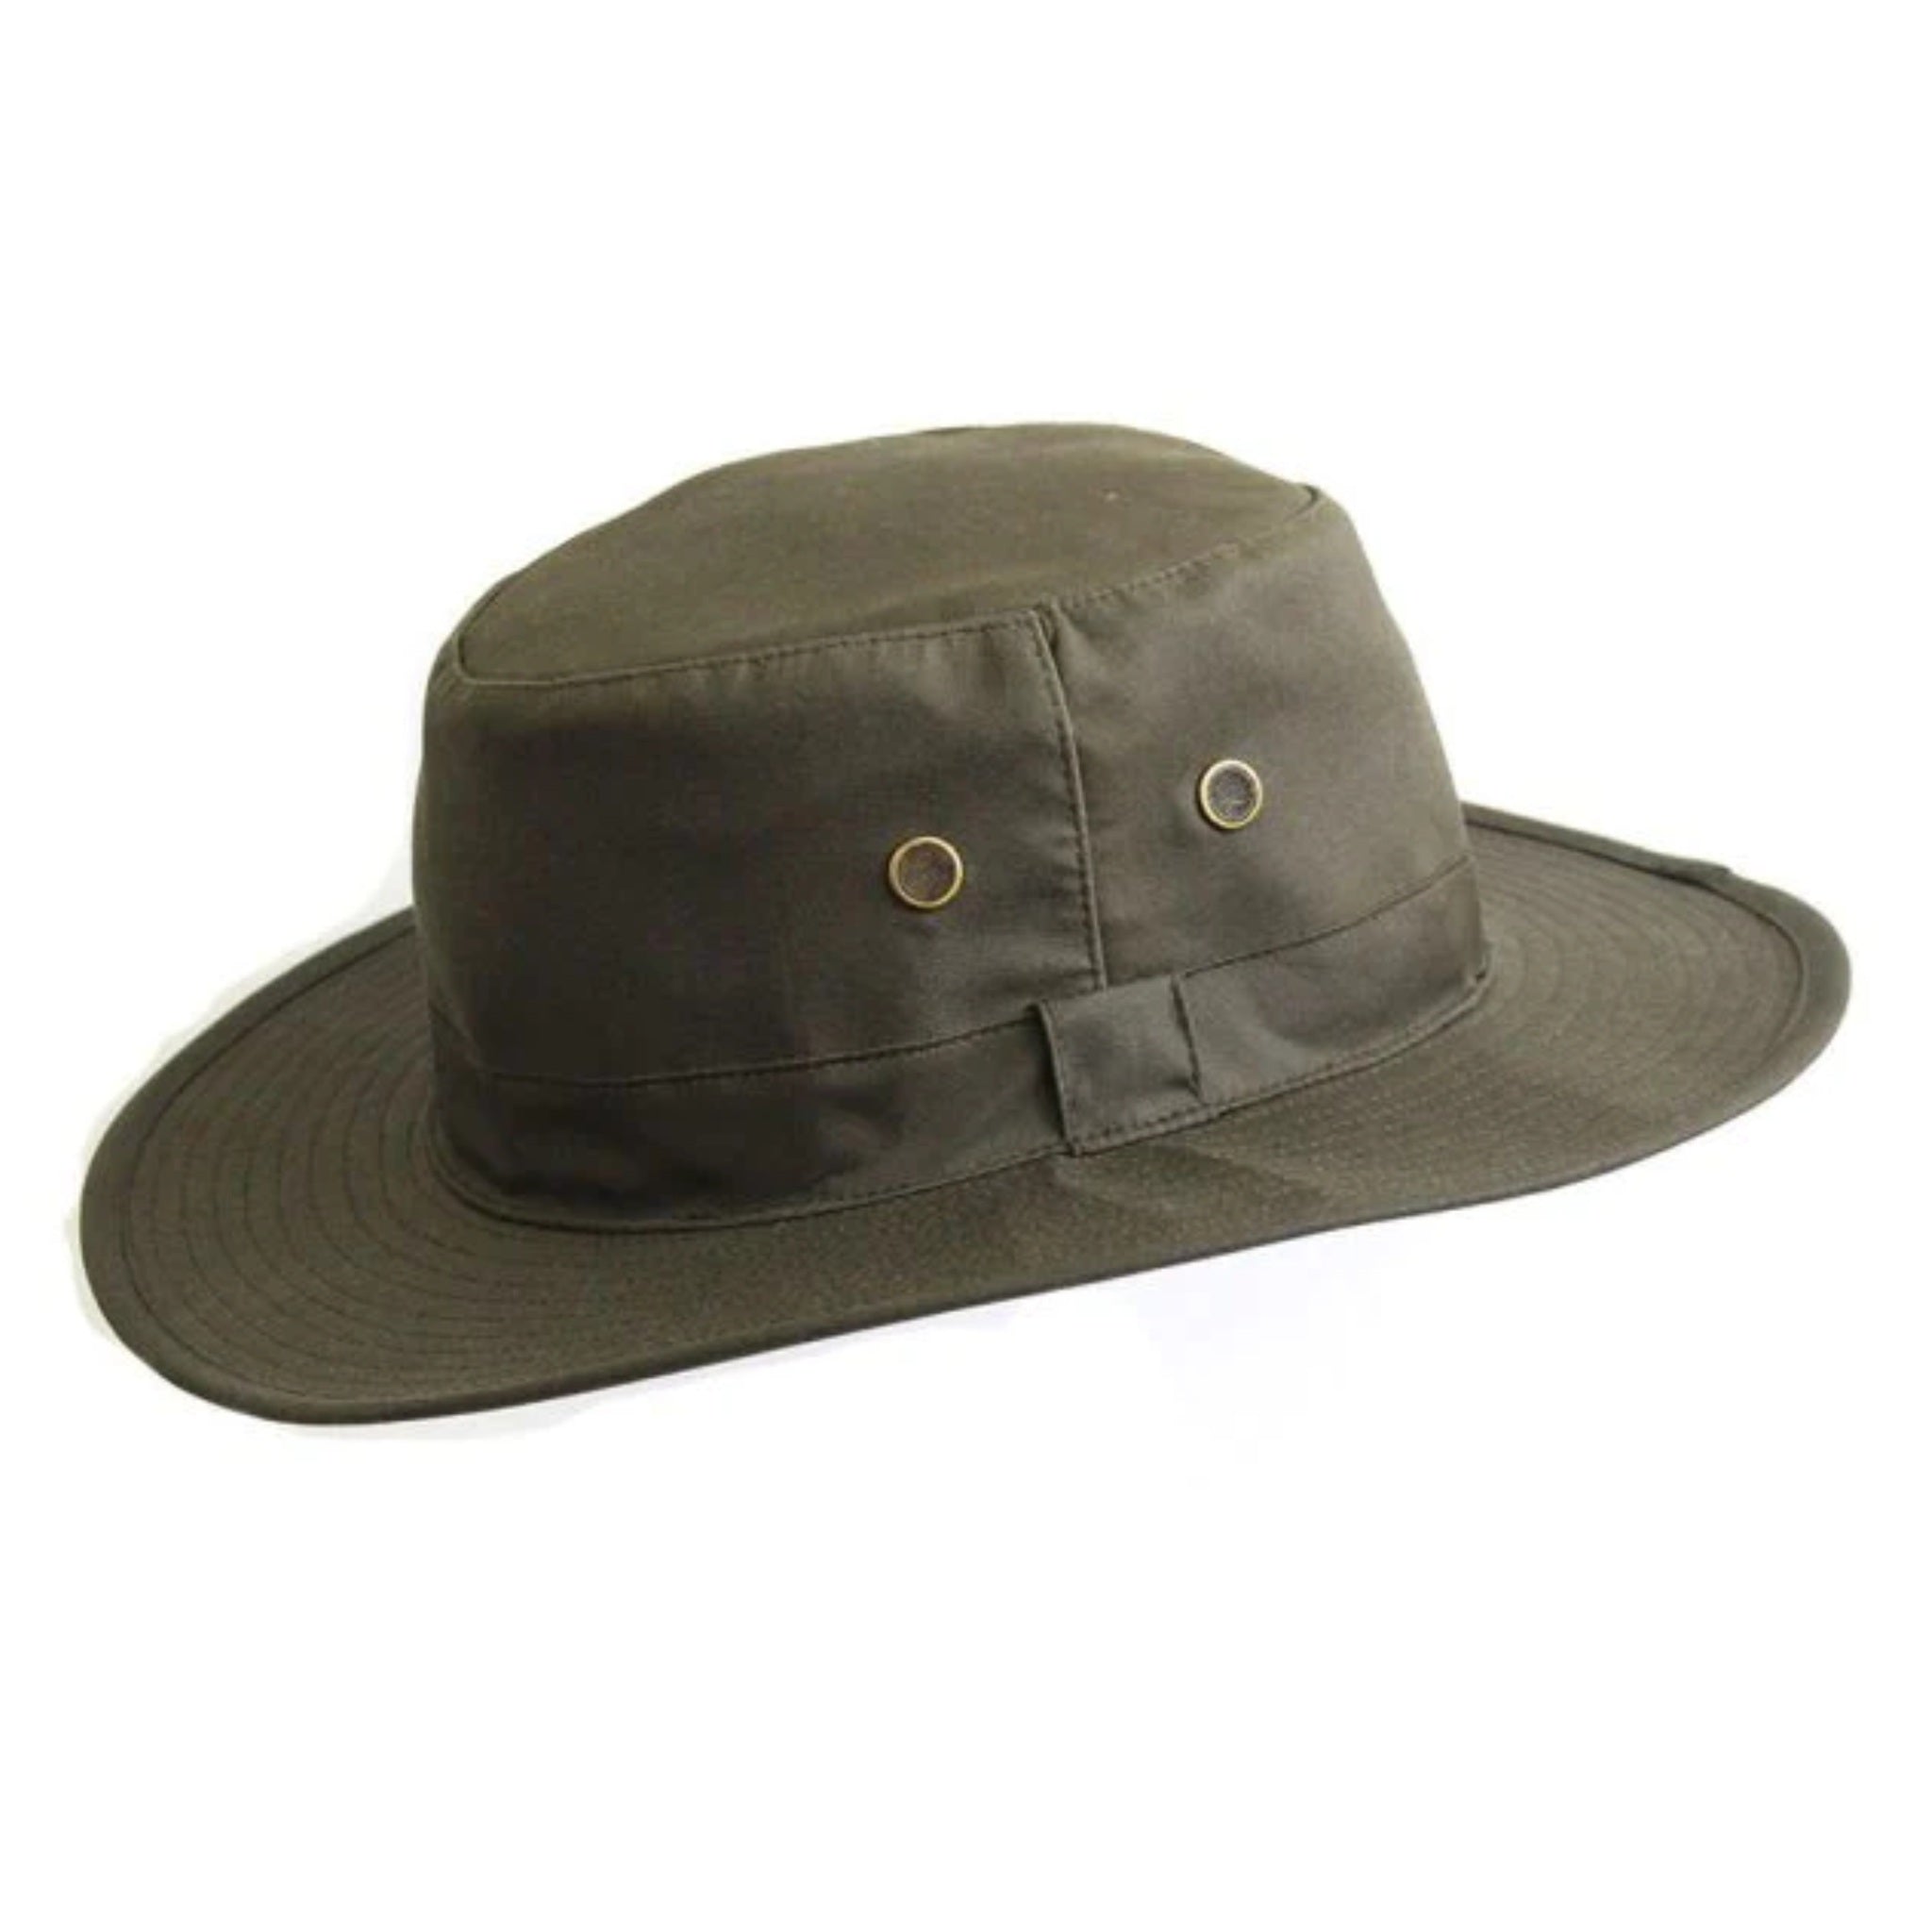 The Hat Shop Denton Water Resistant Colombia Wax Hat Olive